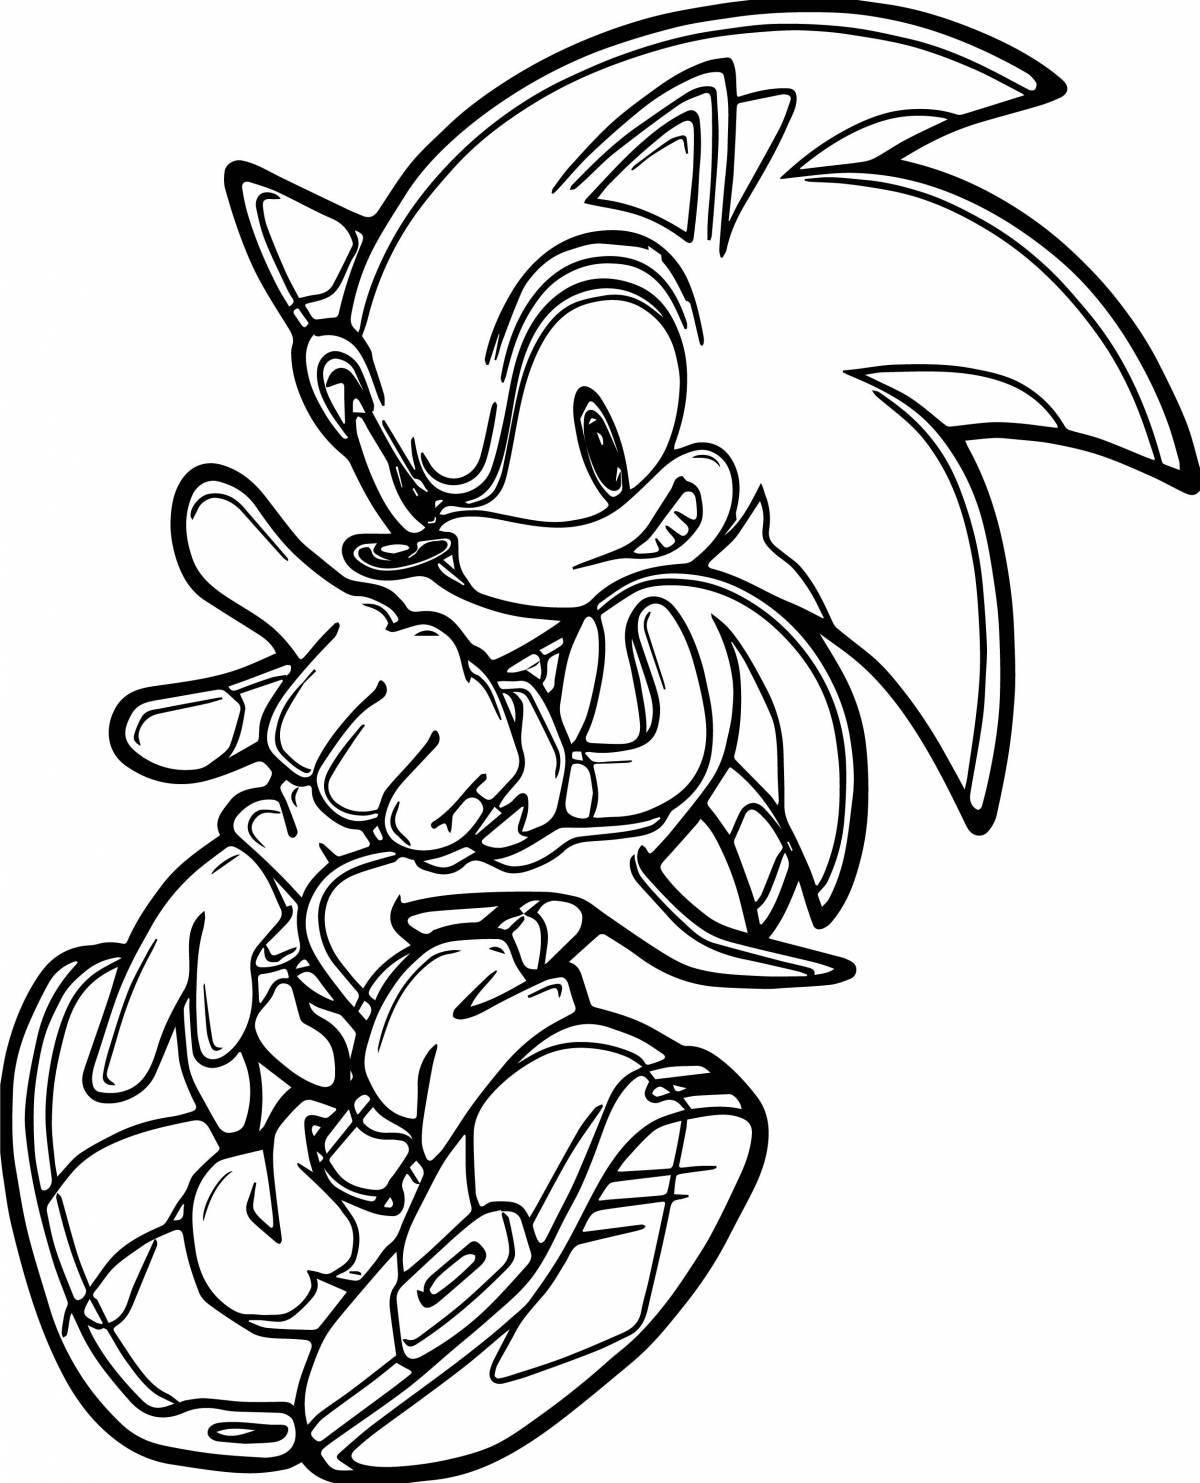 Sonic egze bright coloring page